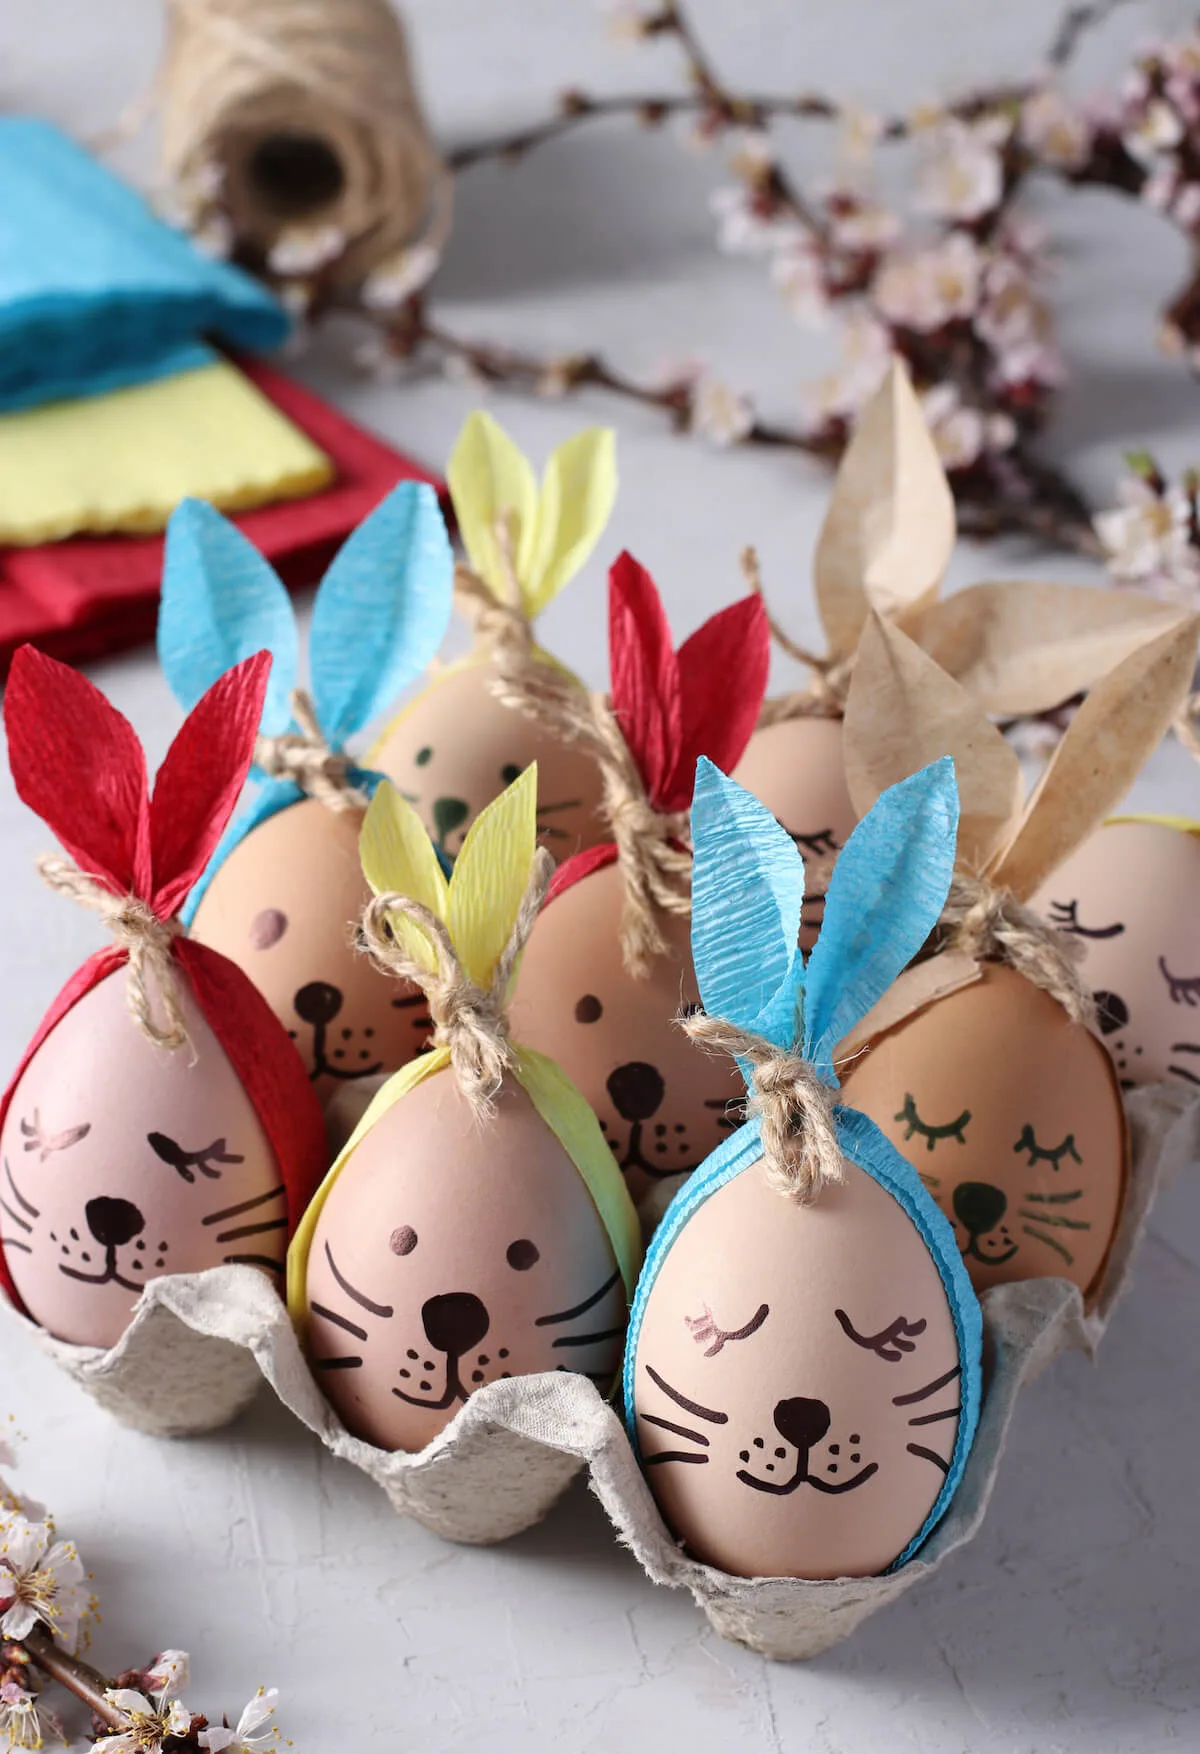 Bunny easter eggs with paper napkin ears